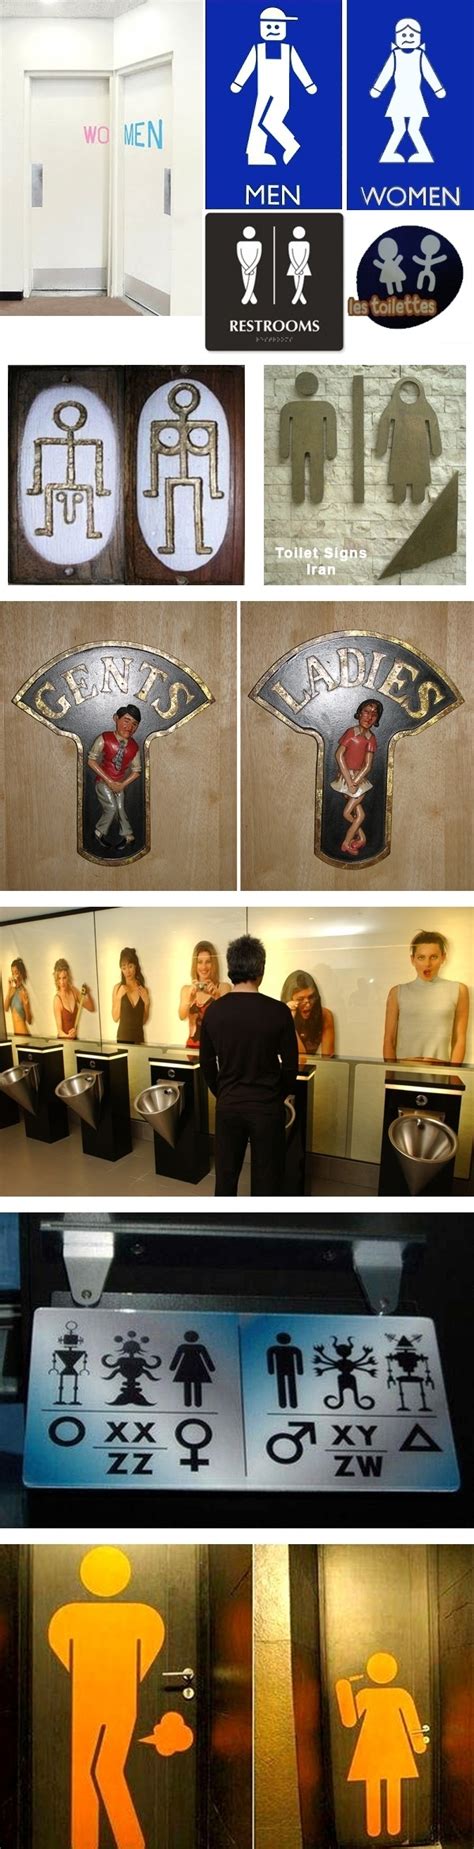 Funny And Creative Toilet Signs 1m4ge